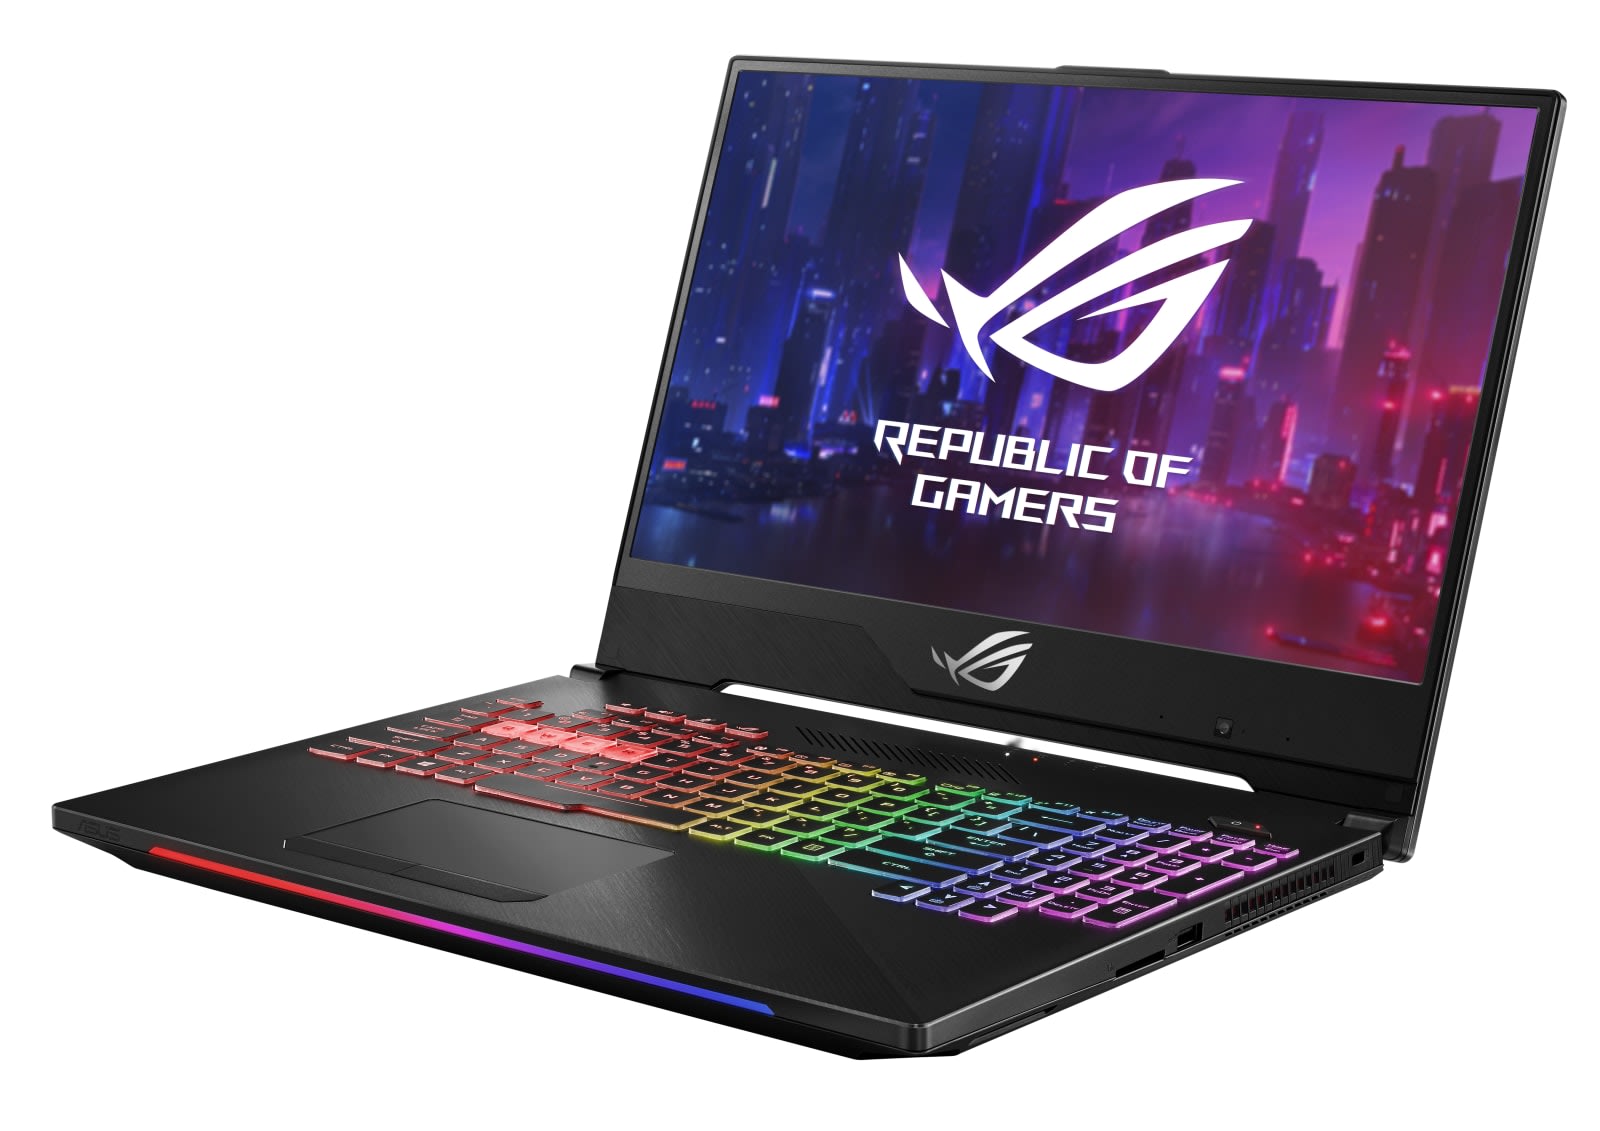 ASUS ROG Strix II gaming laptops to get NVIDIA RTX graphics